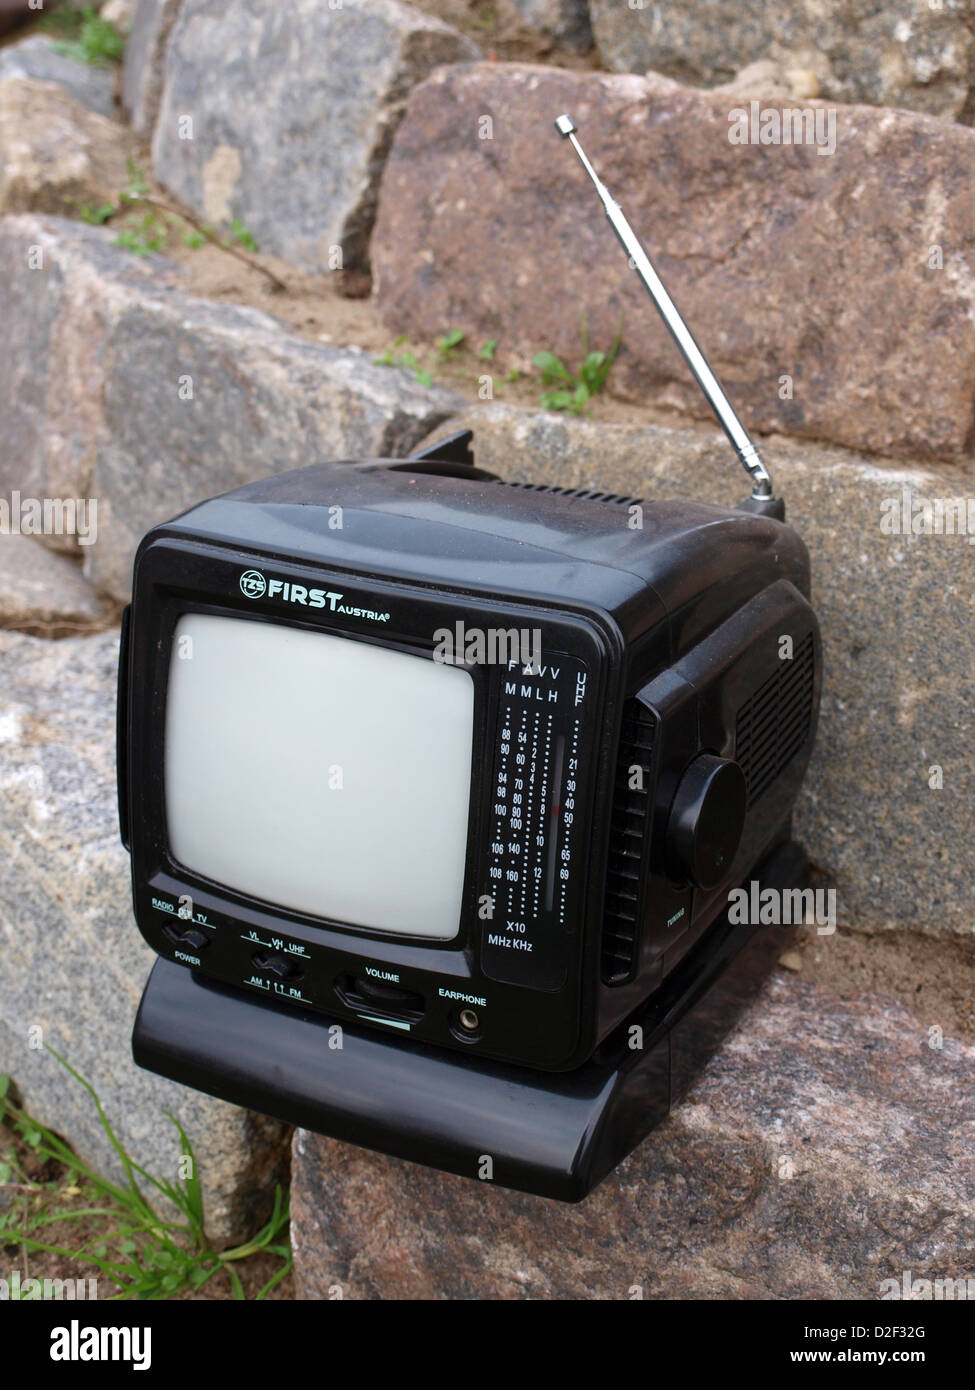 Old retro portable small radio television set FIRST, outdoor, close up Stock Photo